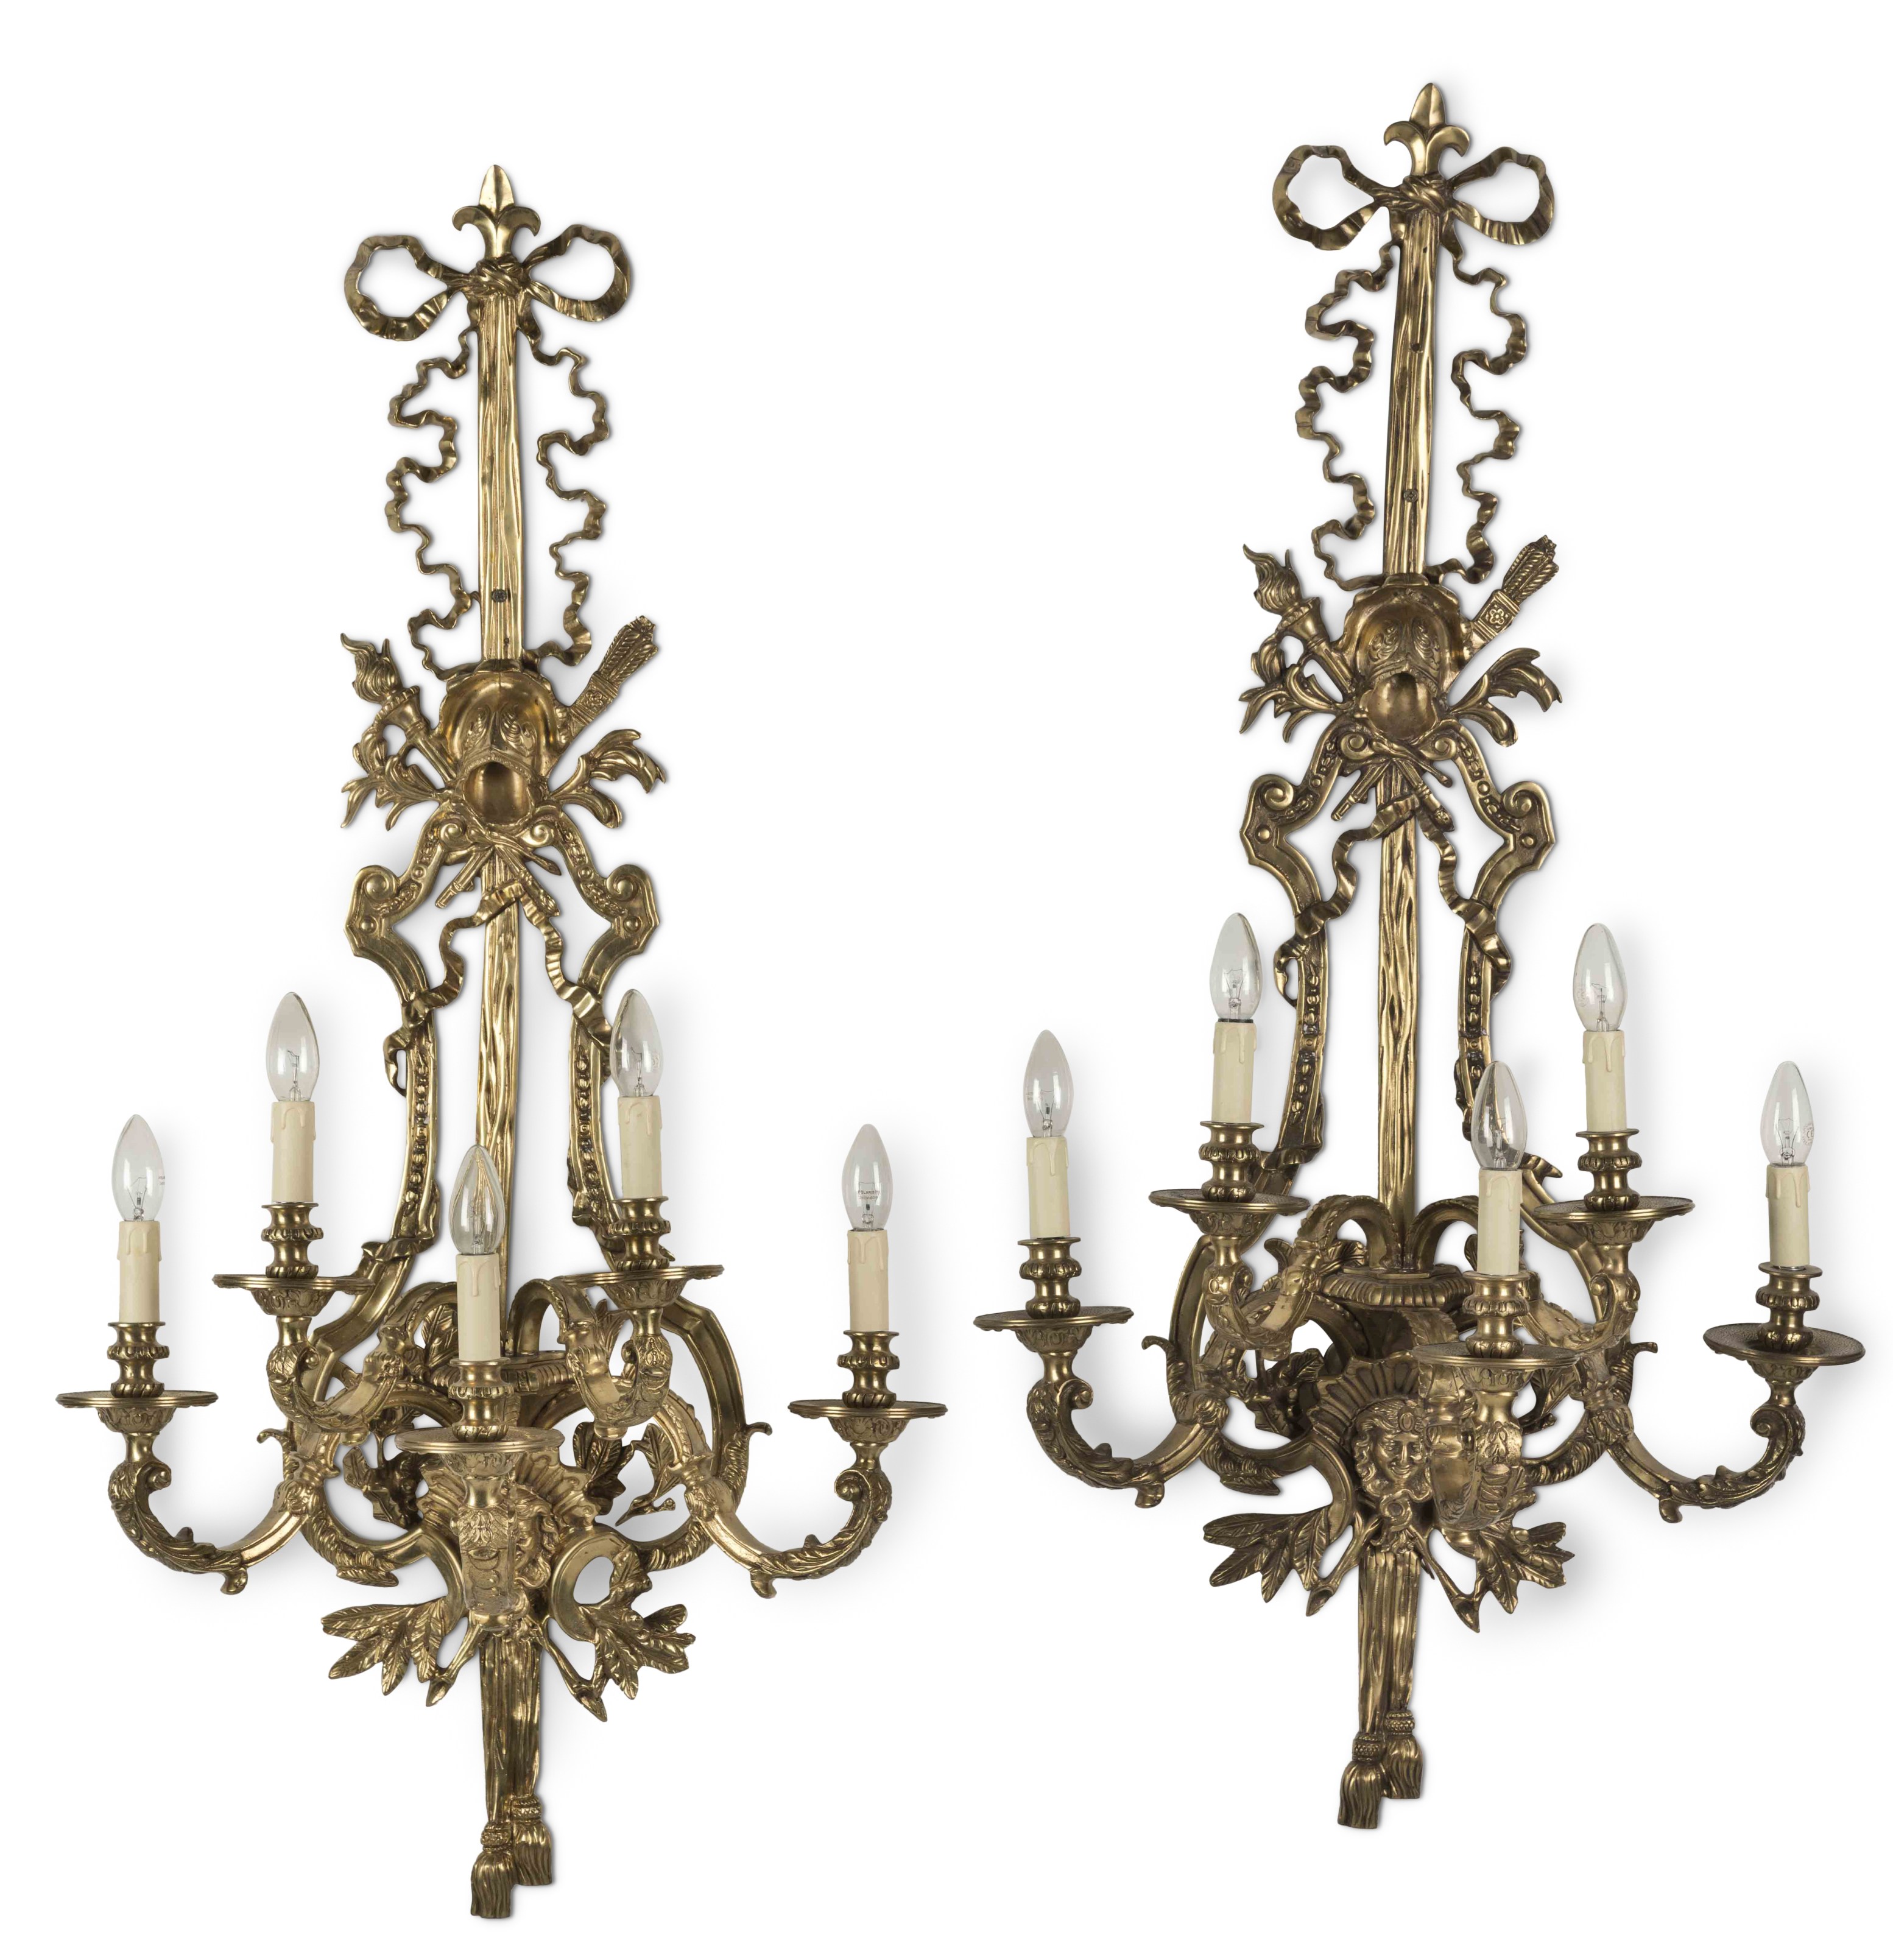 A set of ten large gilt-brass five-branch wall lights, in the Louis XVI-style First seen in Seas...